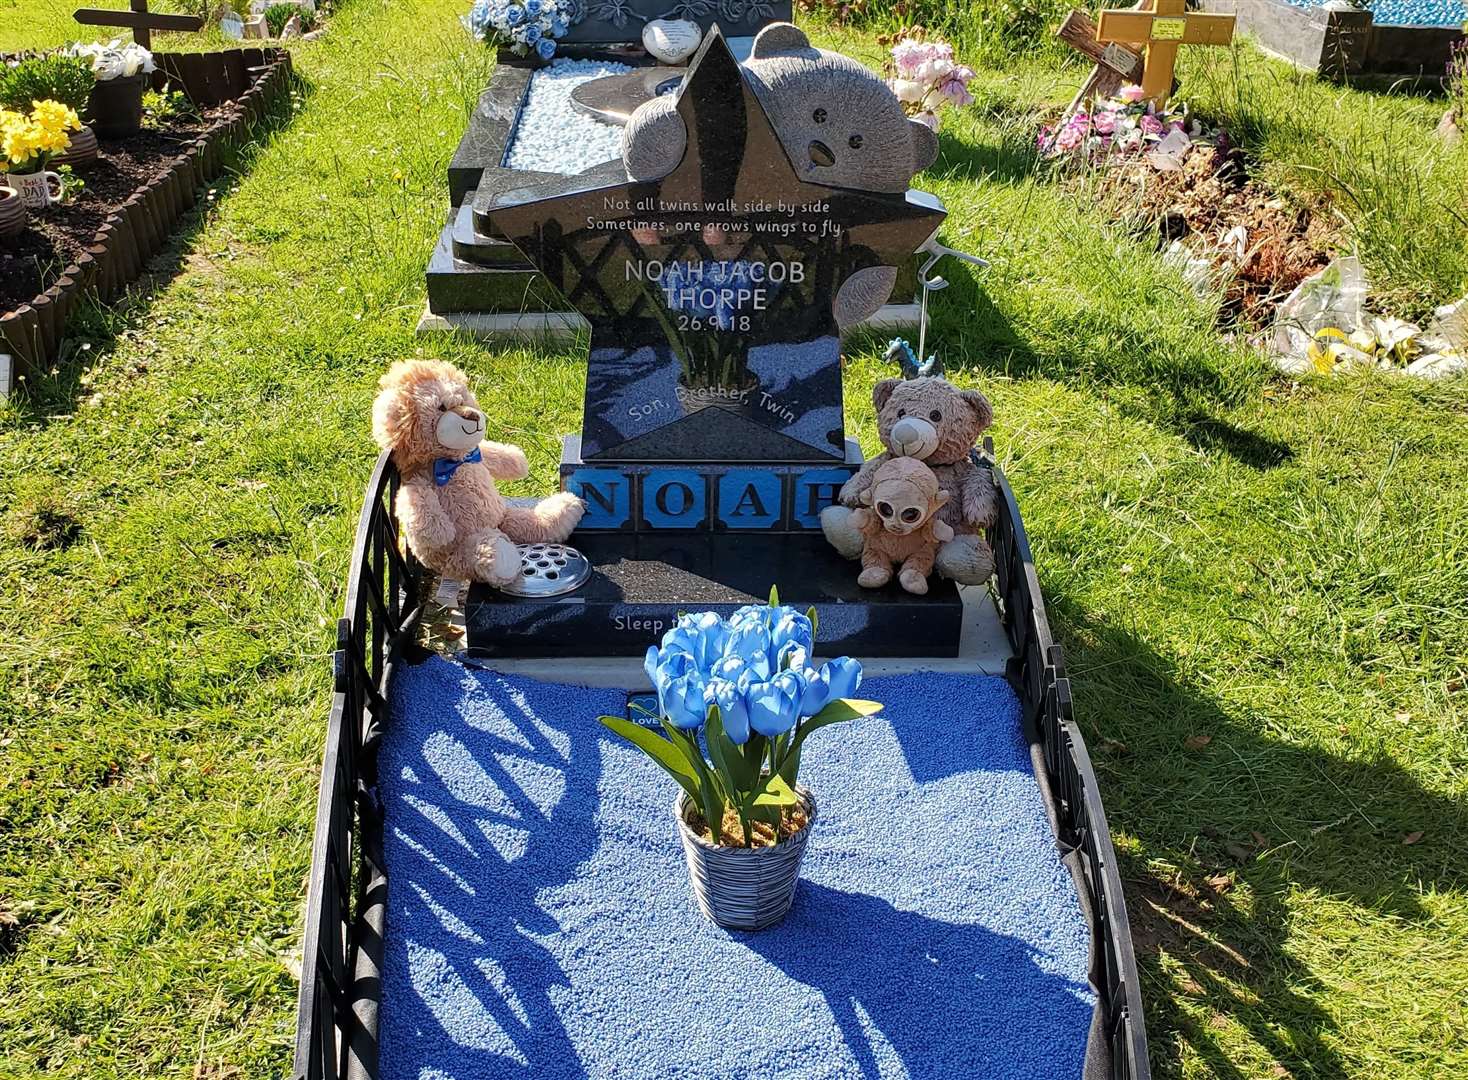 Jocasta is calling for action to be taken against irresponsible dog walkers who let their pets defile her son’s grave